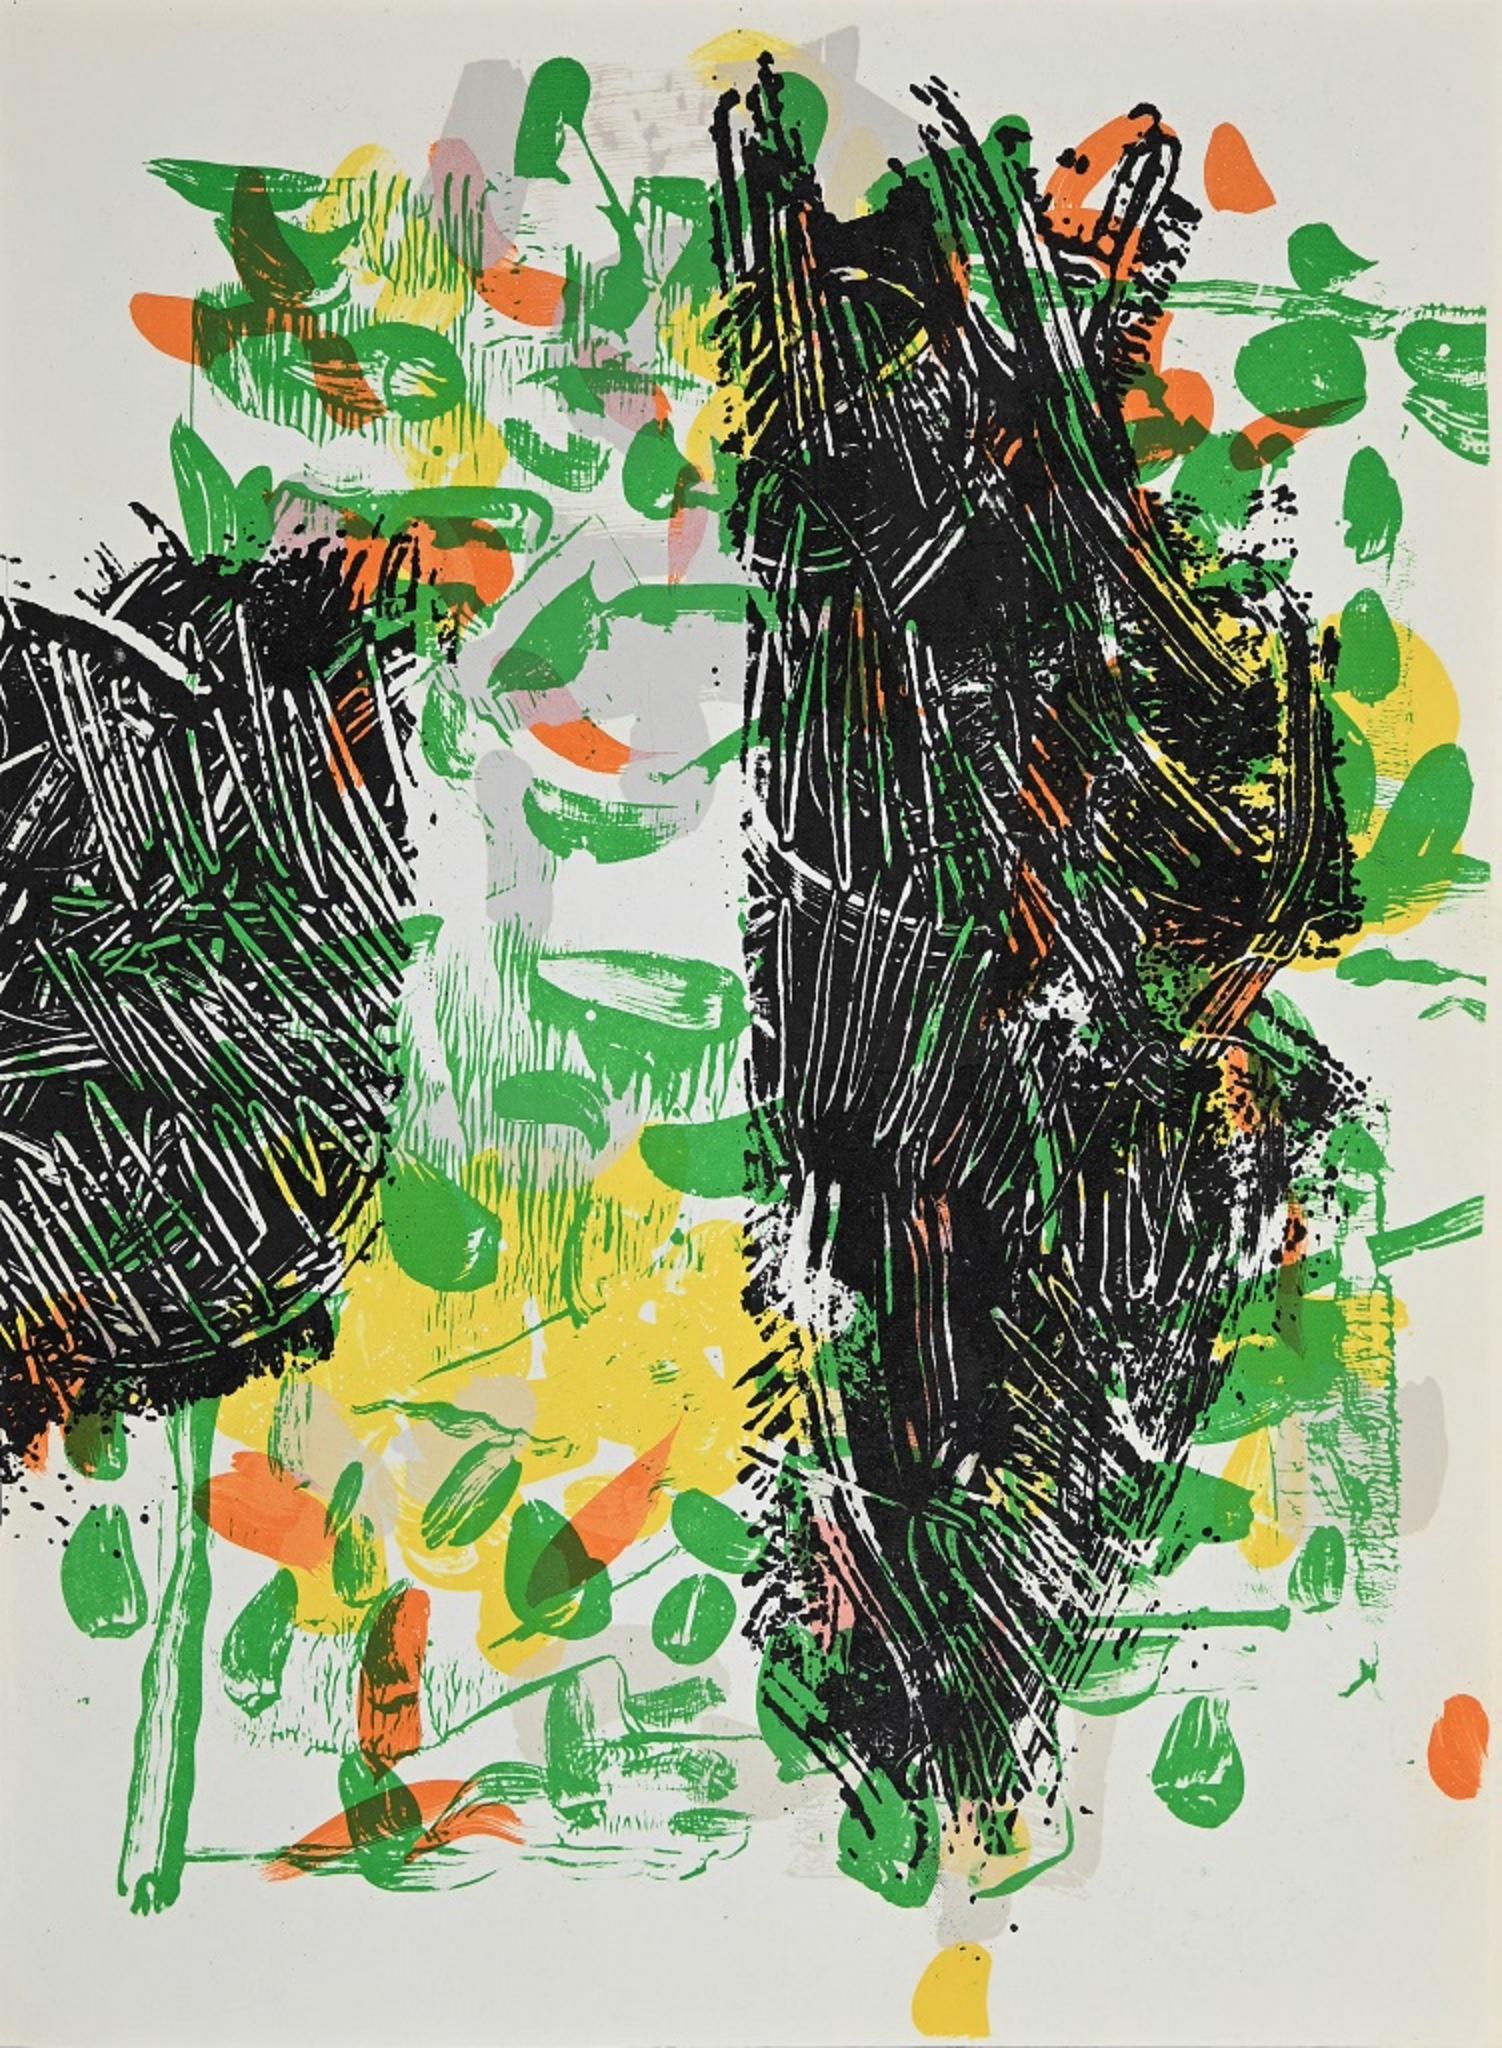 Green Composition - Original Lithograph by Jean-Paul Riopelle - 1968